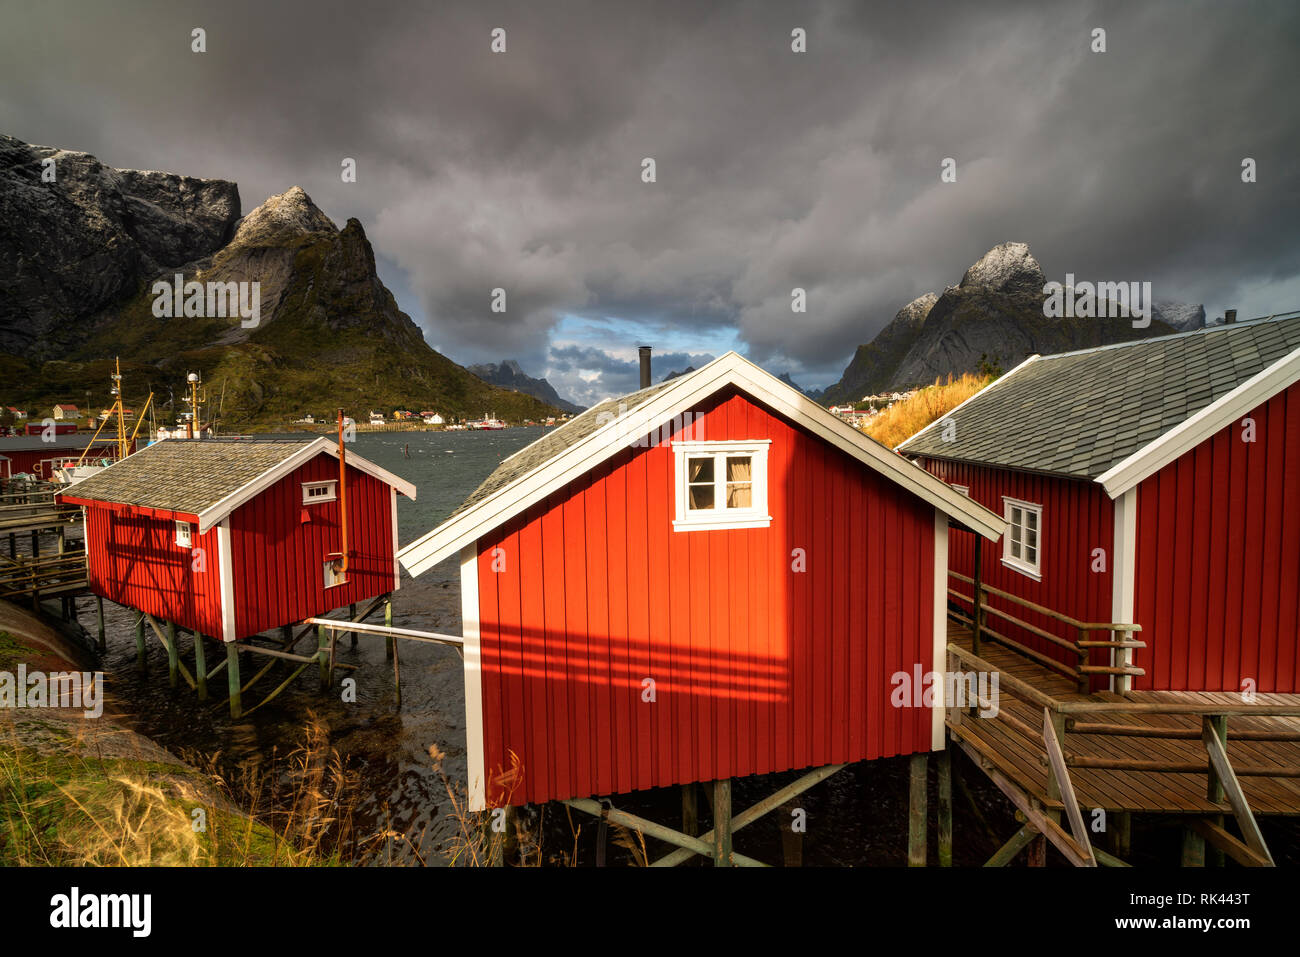 Storm clouds above the red traditional fisherman's huts (Rorbu), Reine, Nordland, Lofoten Islands, Norway Stock Photo